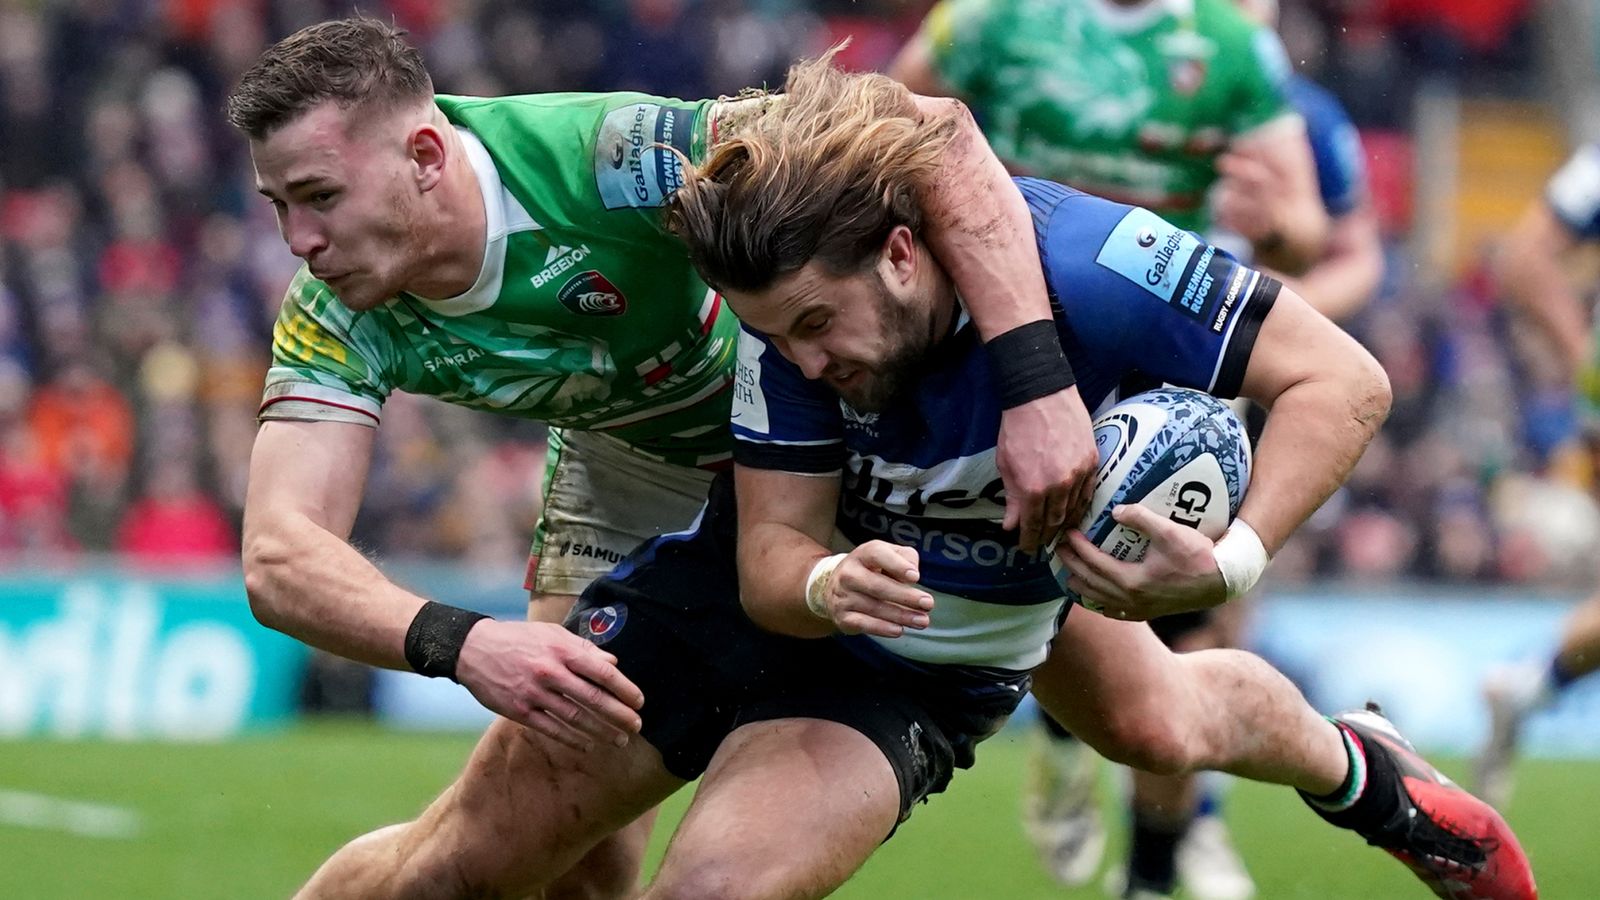 Gallagher Premiership: Tub lose to Leicester and miss likelihood to go high